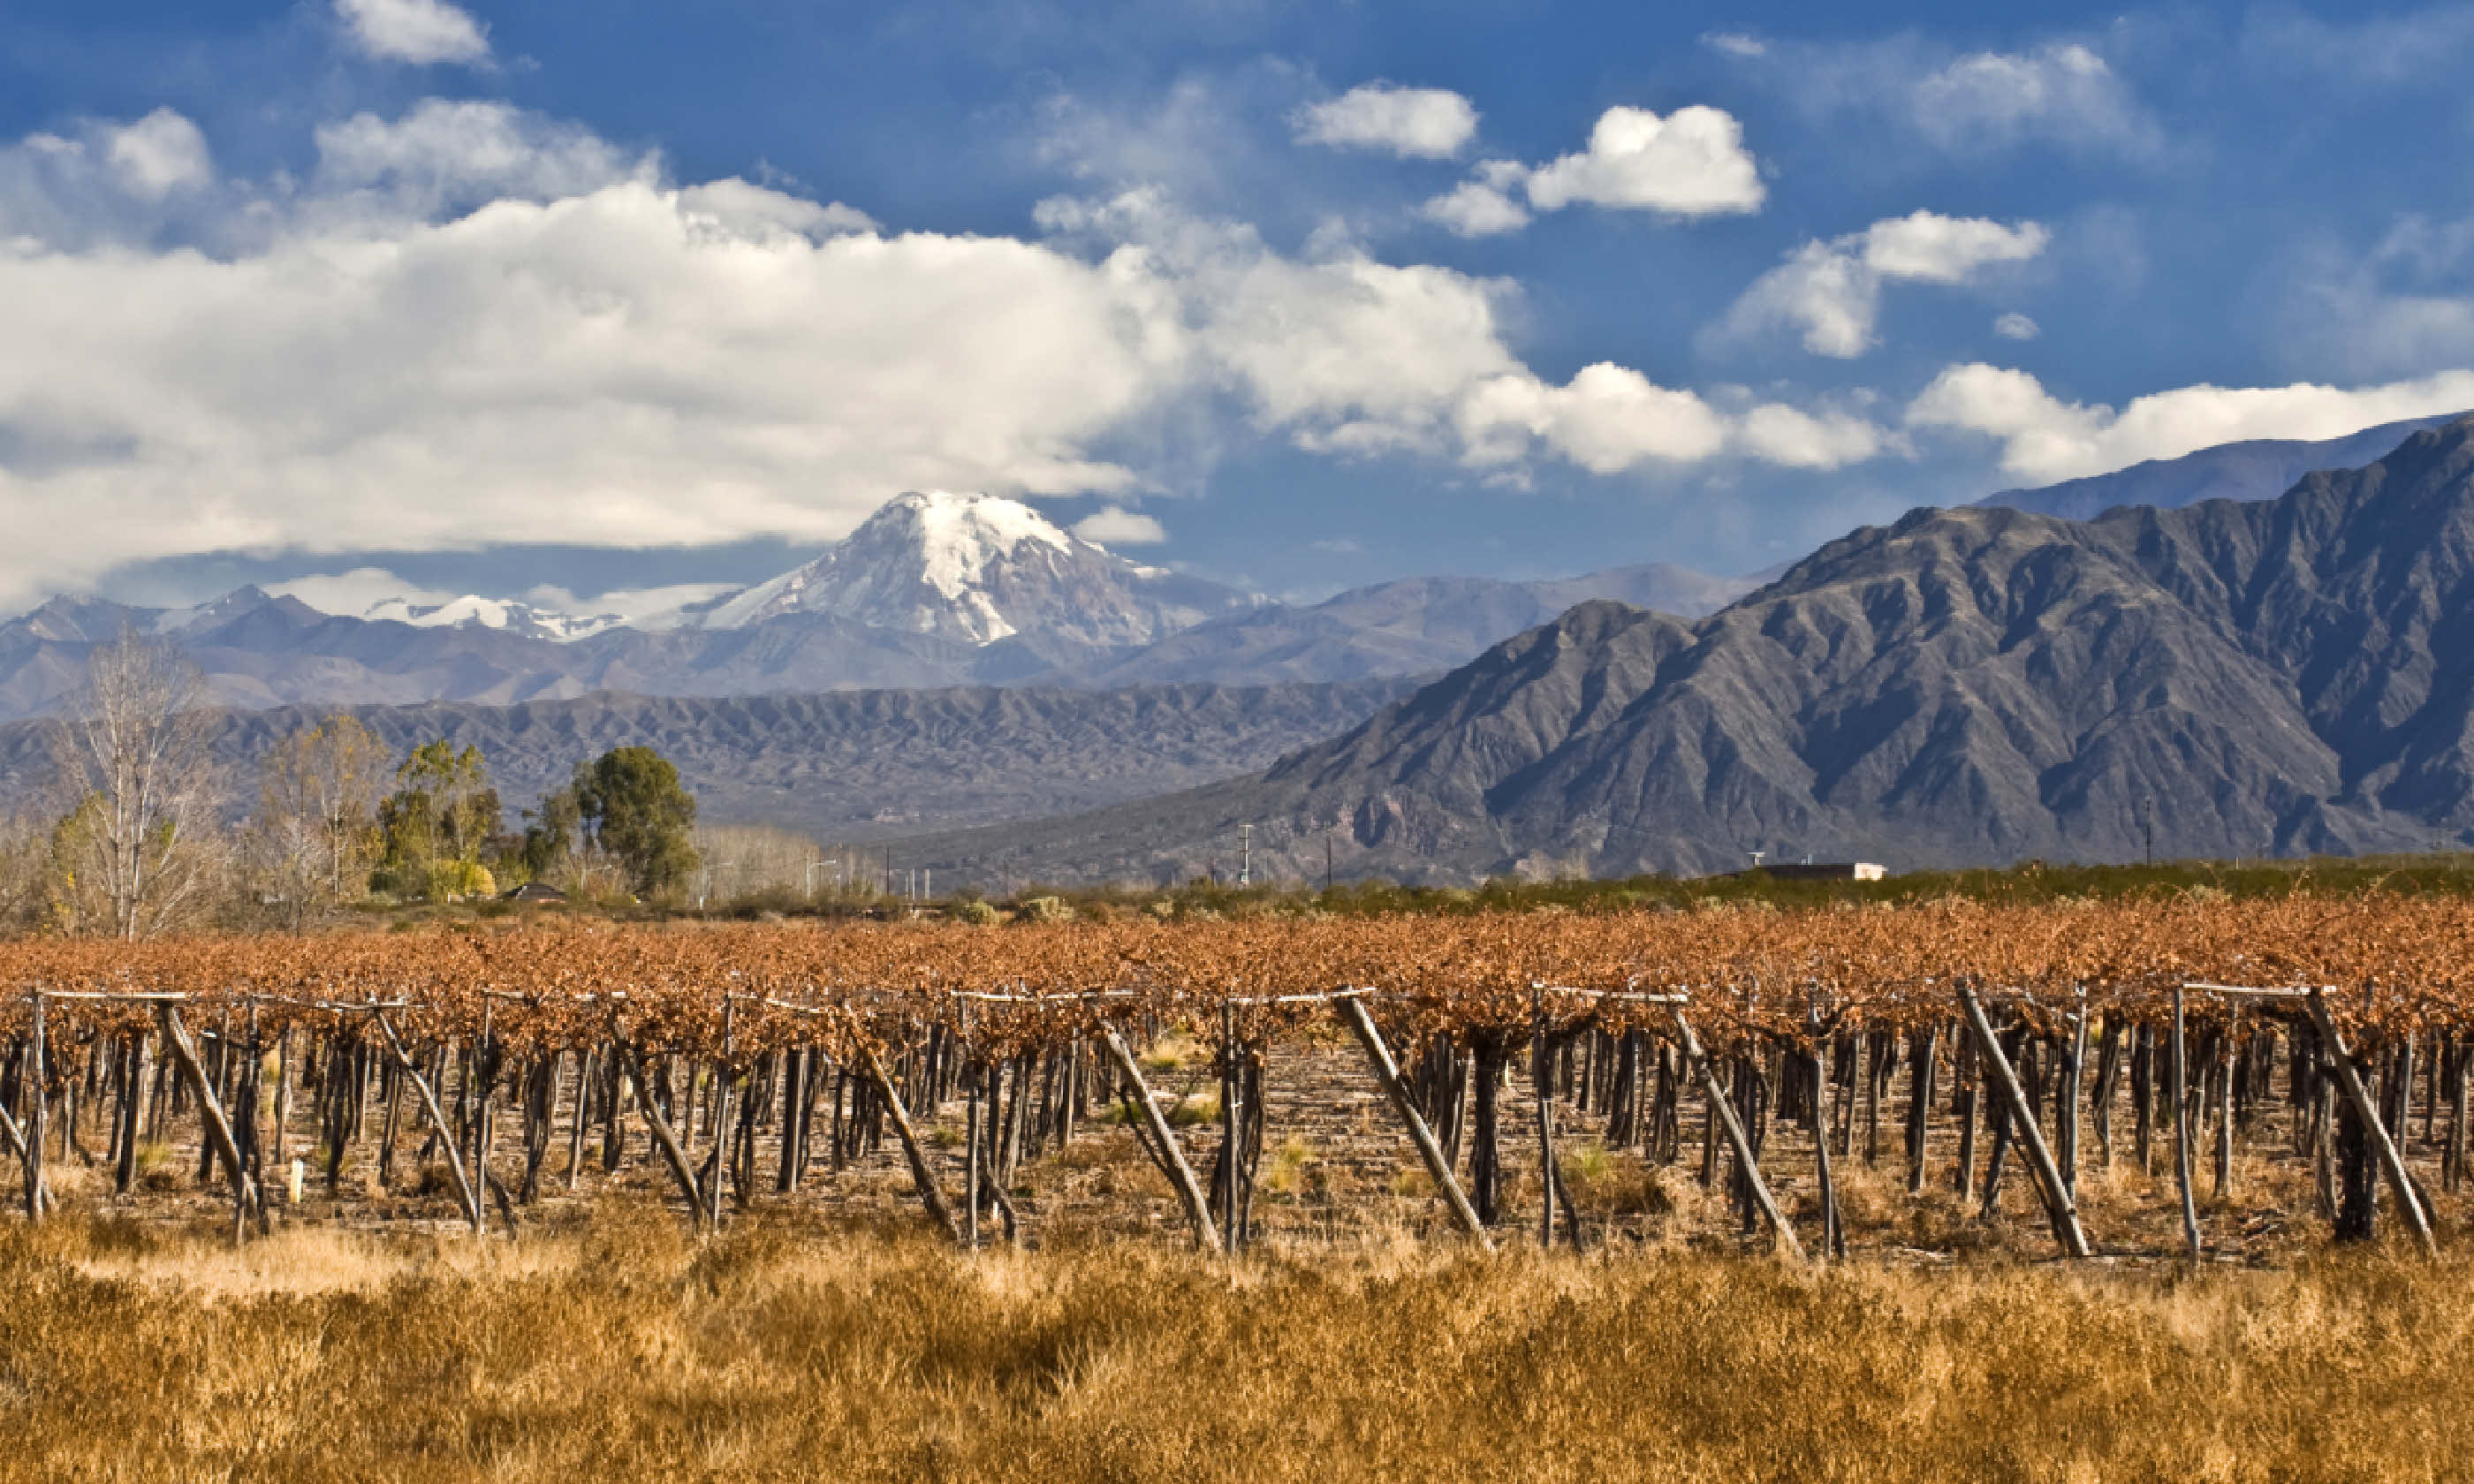 Volcano Aconcagua and vines at a vineyard, Argentina (Shutterstock)